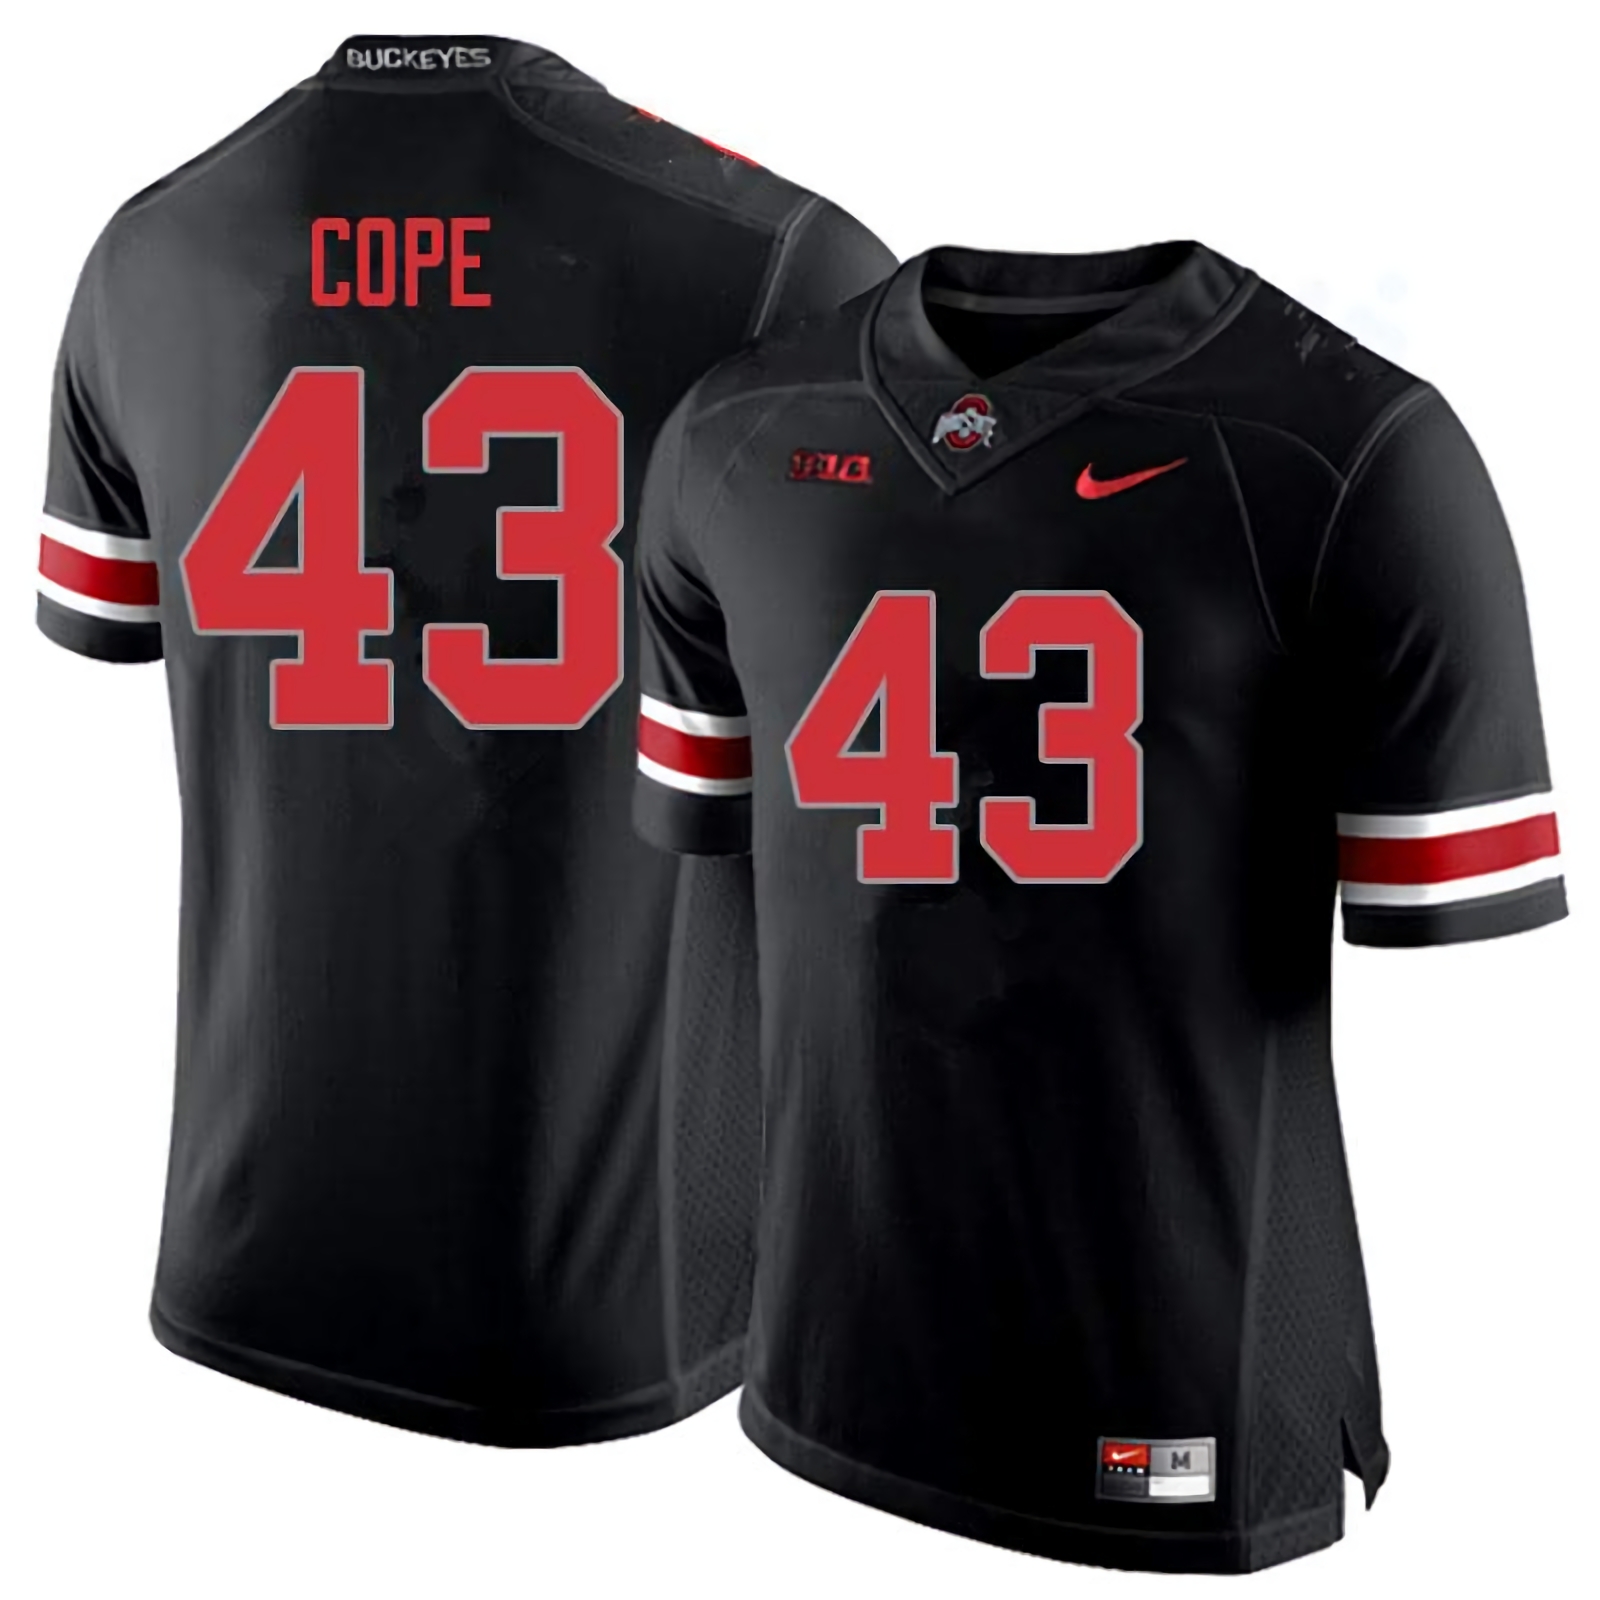 Robert Cope Ohio State Buckeyes Men's NCAA #43 Nike Blackout College Stitched Football Jersey BUO2656AF